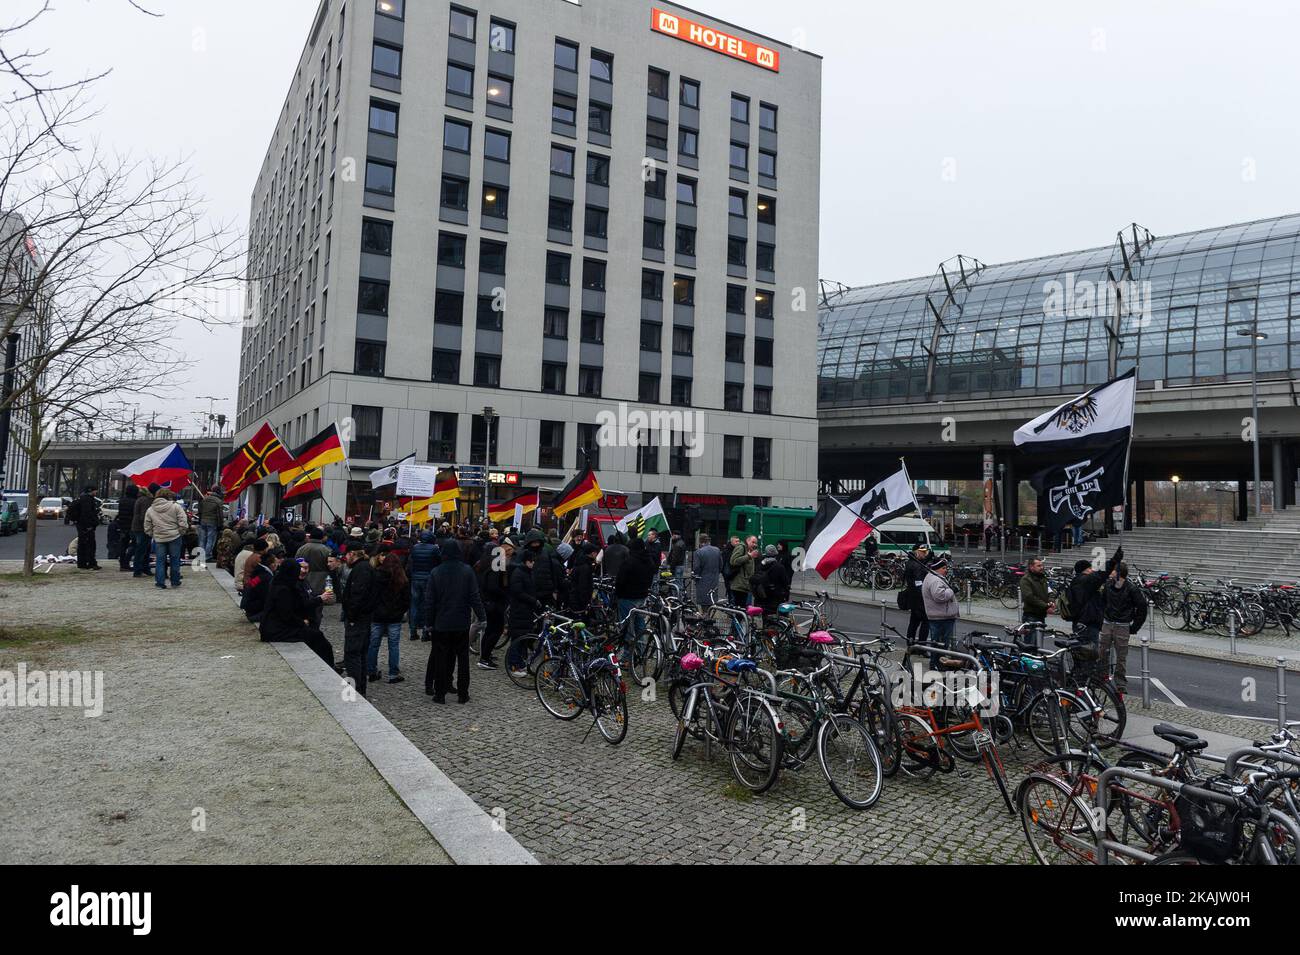 Supporters of the Pegida movement, in Berlin known by its local chapter as Baergida, carry flags and shoot anti-government slogan on November 26, 2015 in Berlin, Germany. Pegida is critical of Islam and many of its supporters see Muslim immigration as a threat to Germany. (Photo by Markus Heine/NurPhoto) *** Please Use Credit from Credit Field *** Stock Photo